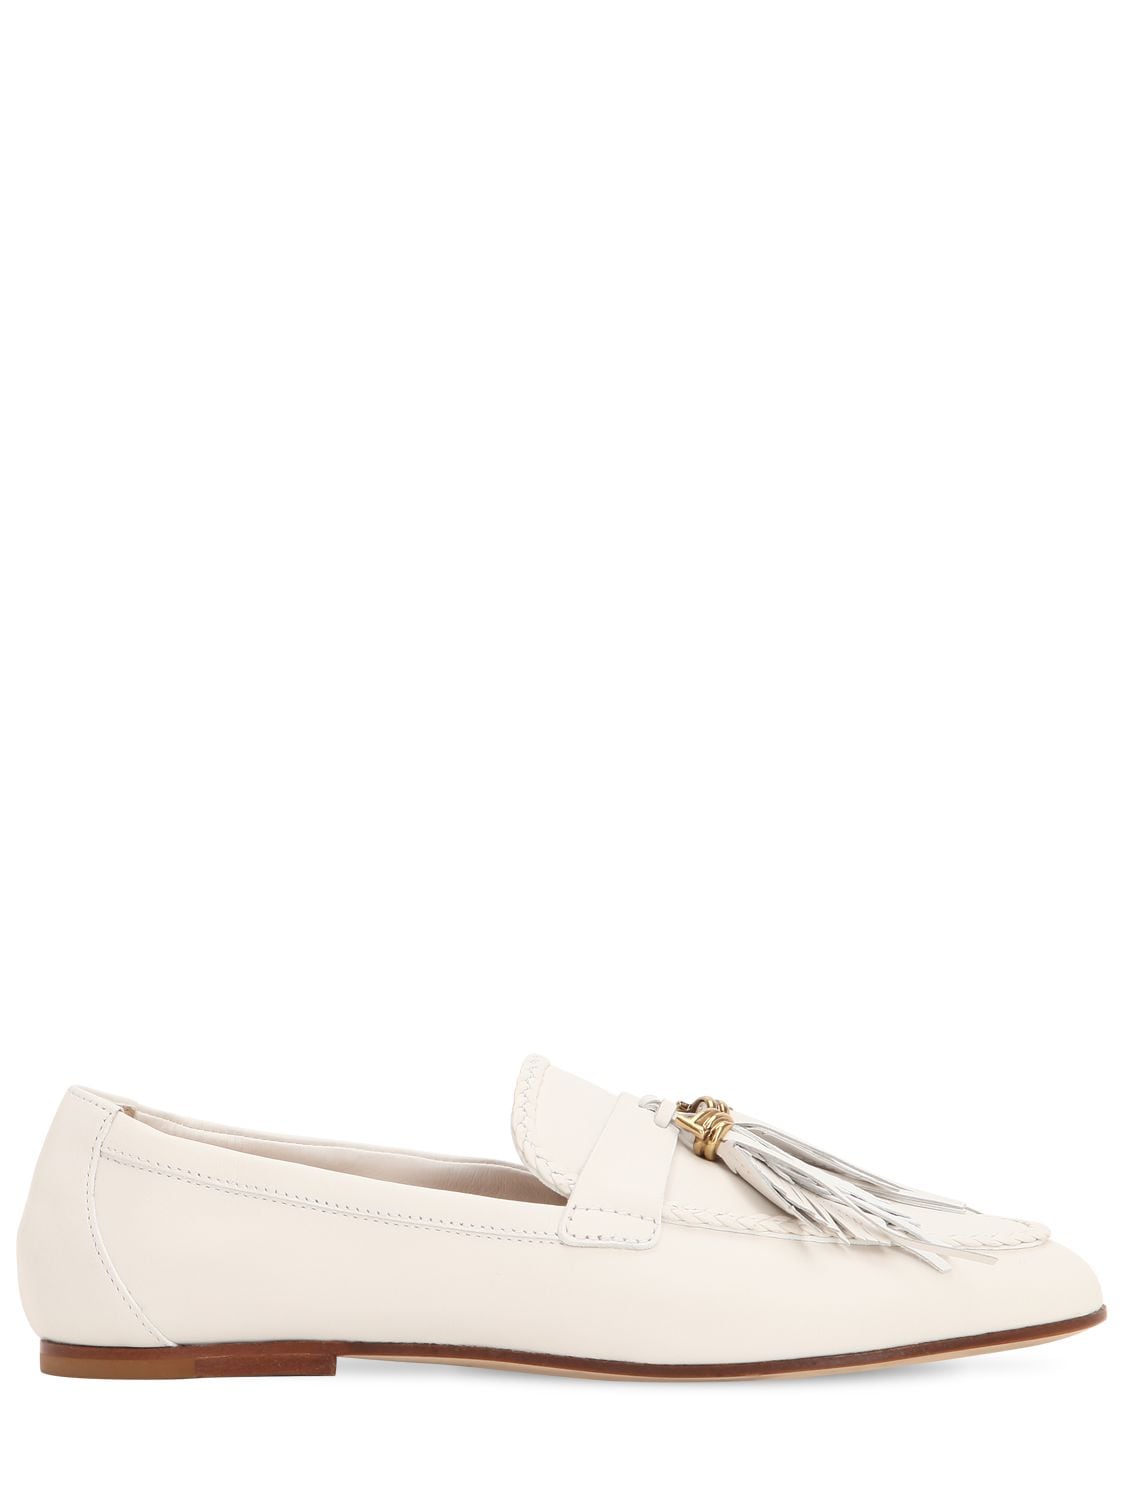 Tod's 10mm Suede Flats W/ Tassels In White